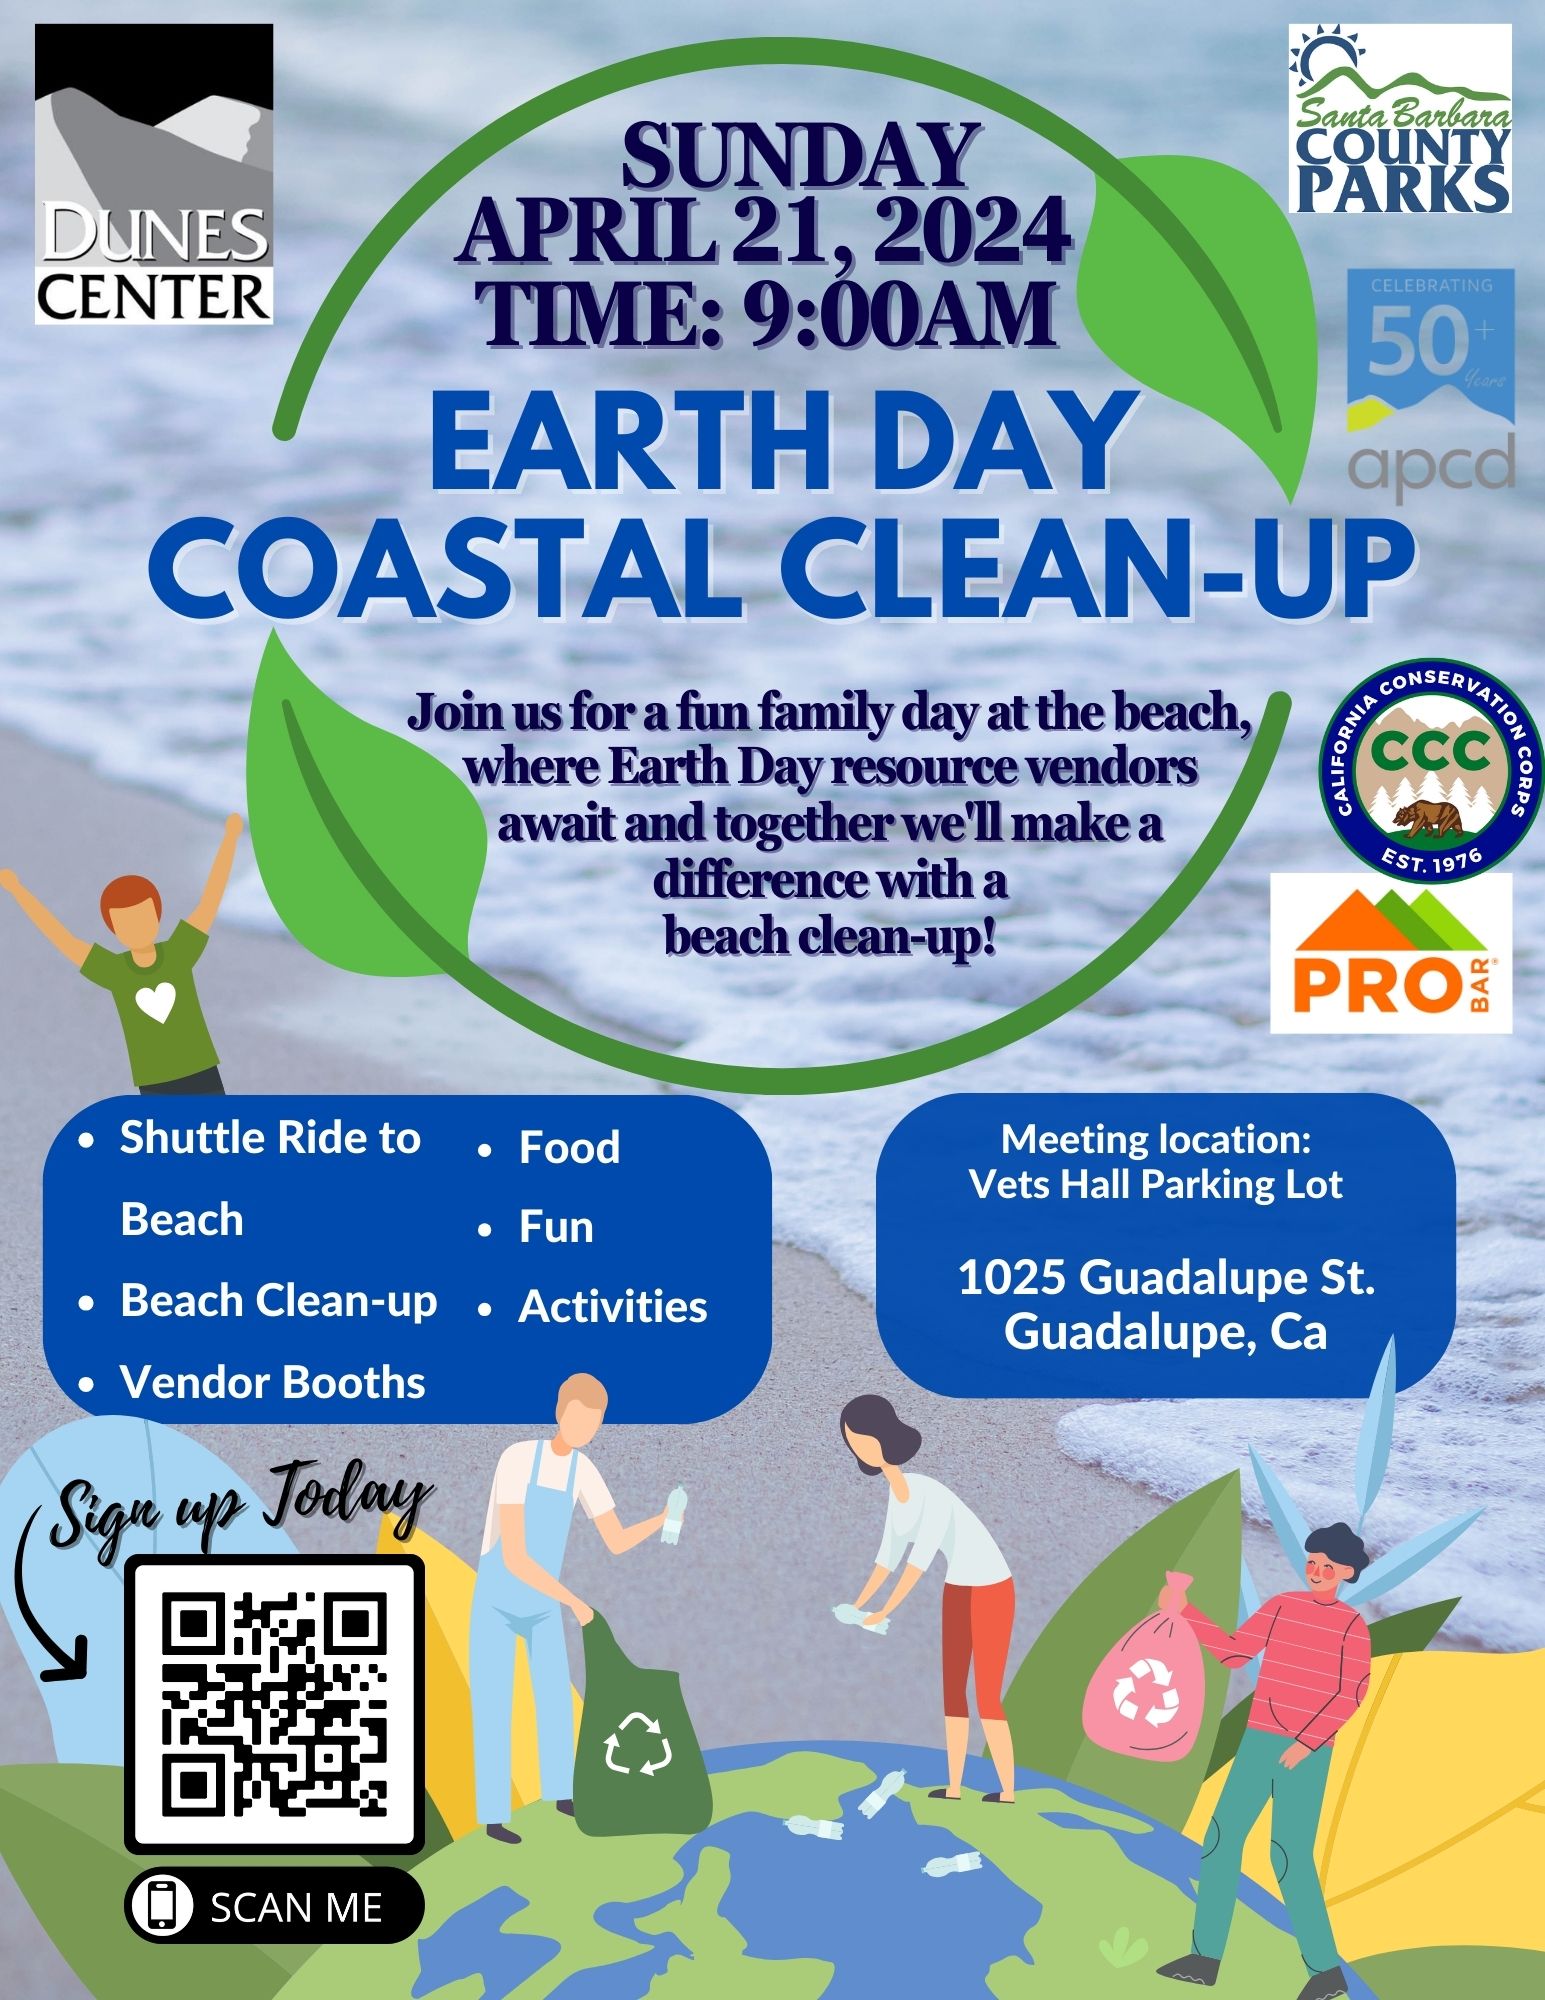 Sunday, April 21, Earth Day Coastal Clean-up